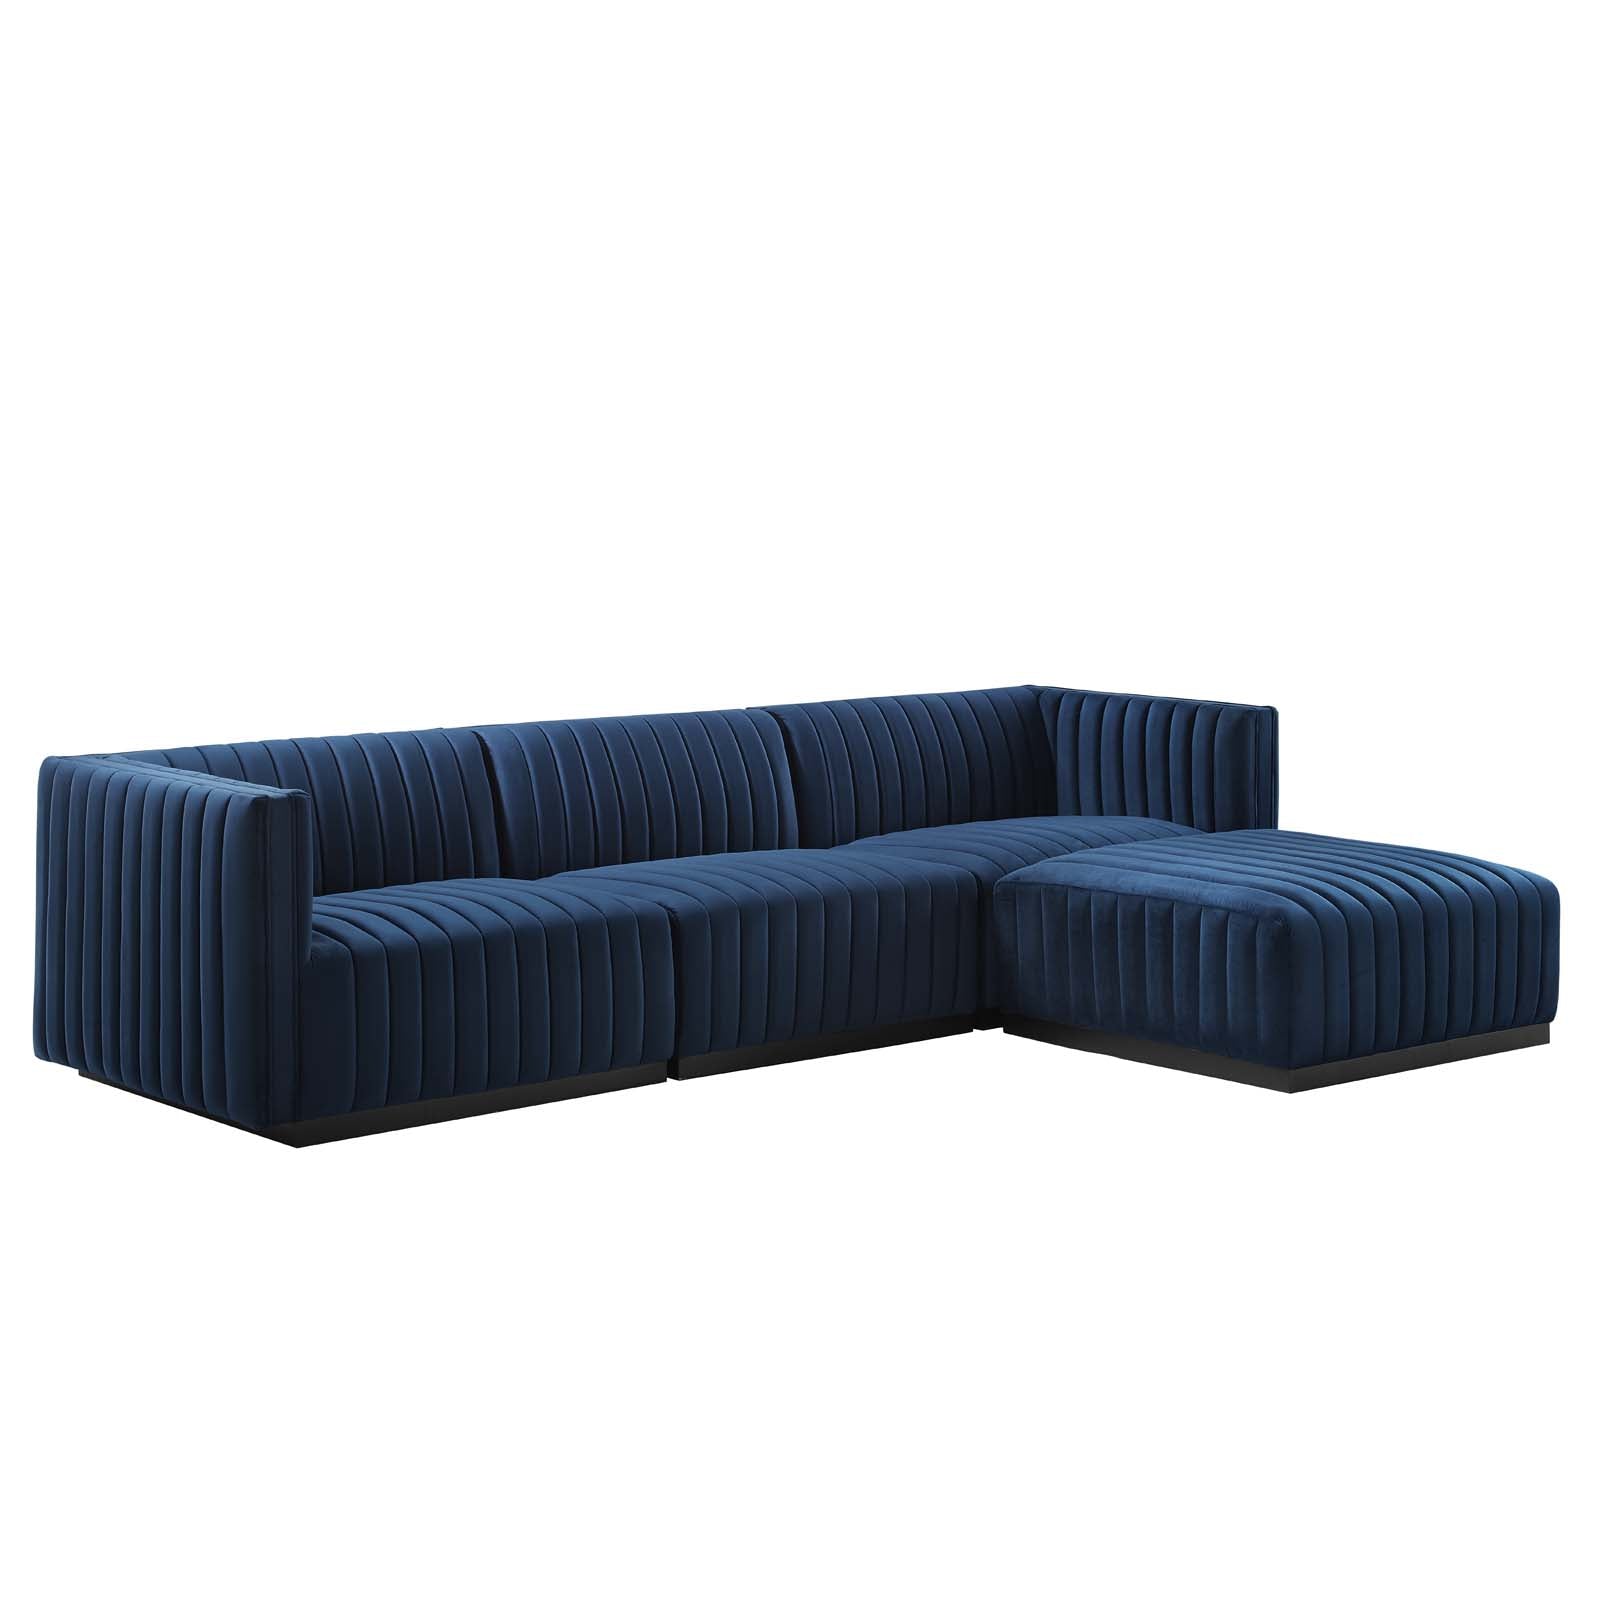 Modway Sectional Sofas - Conjure Channel Tufted Performance Velvet 4-Piece Sectional 28 " H Black Midnight Blue